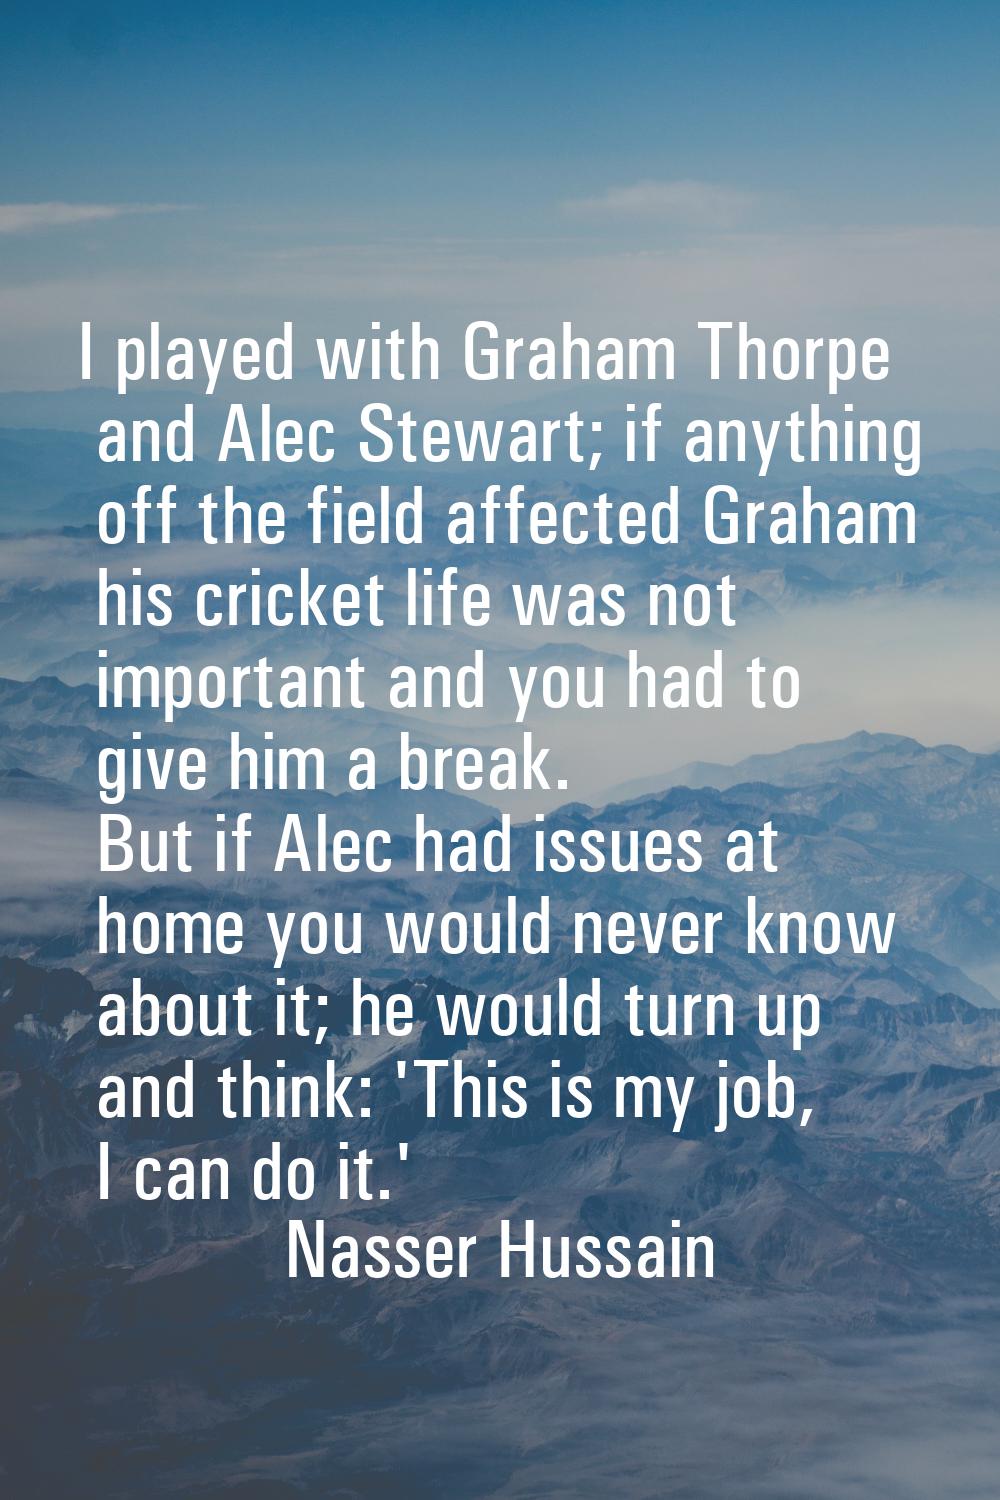 I played with Graham Thorpe and Alec Stewart; if anything off the field affected Graham his cricket